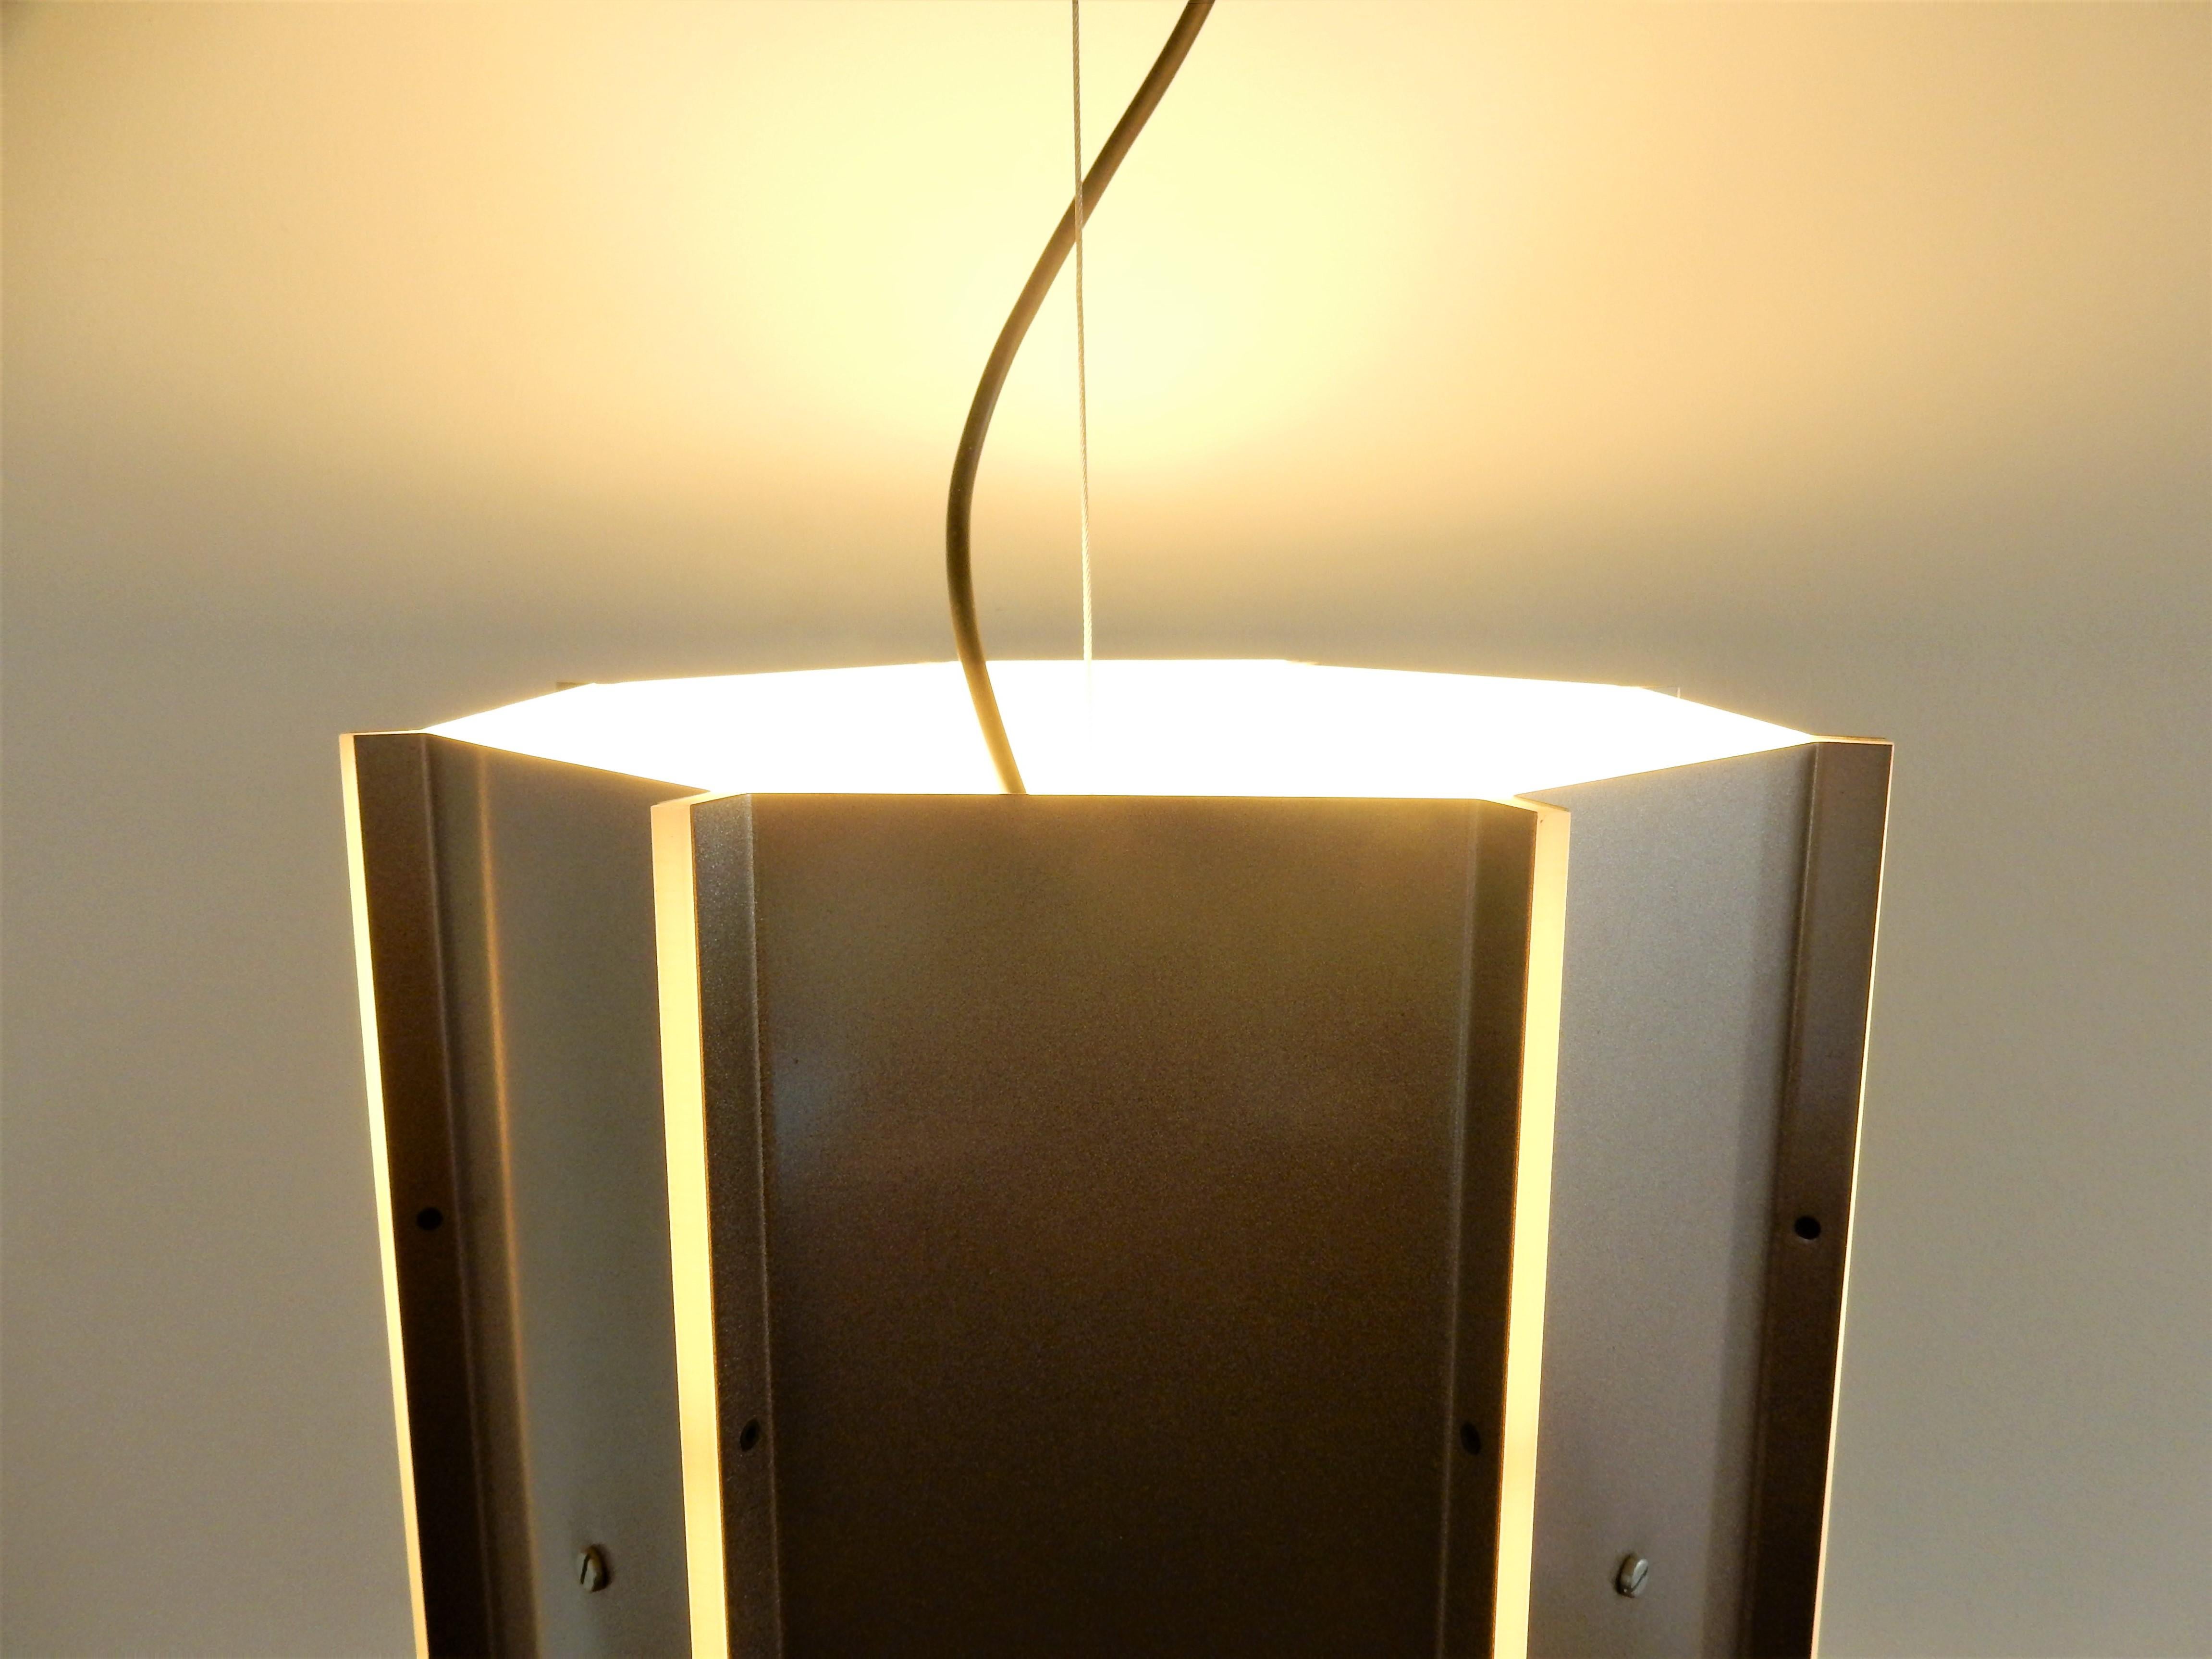 Large Industrial B-1011.0000 Pendant Lamp by RAAK In Good Condition For Sale In Steenwijk, NL